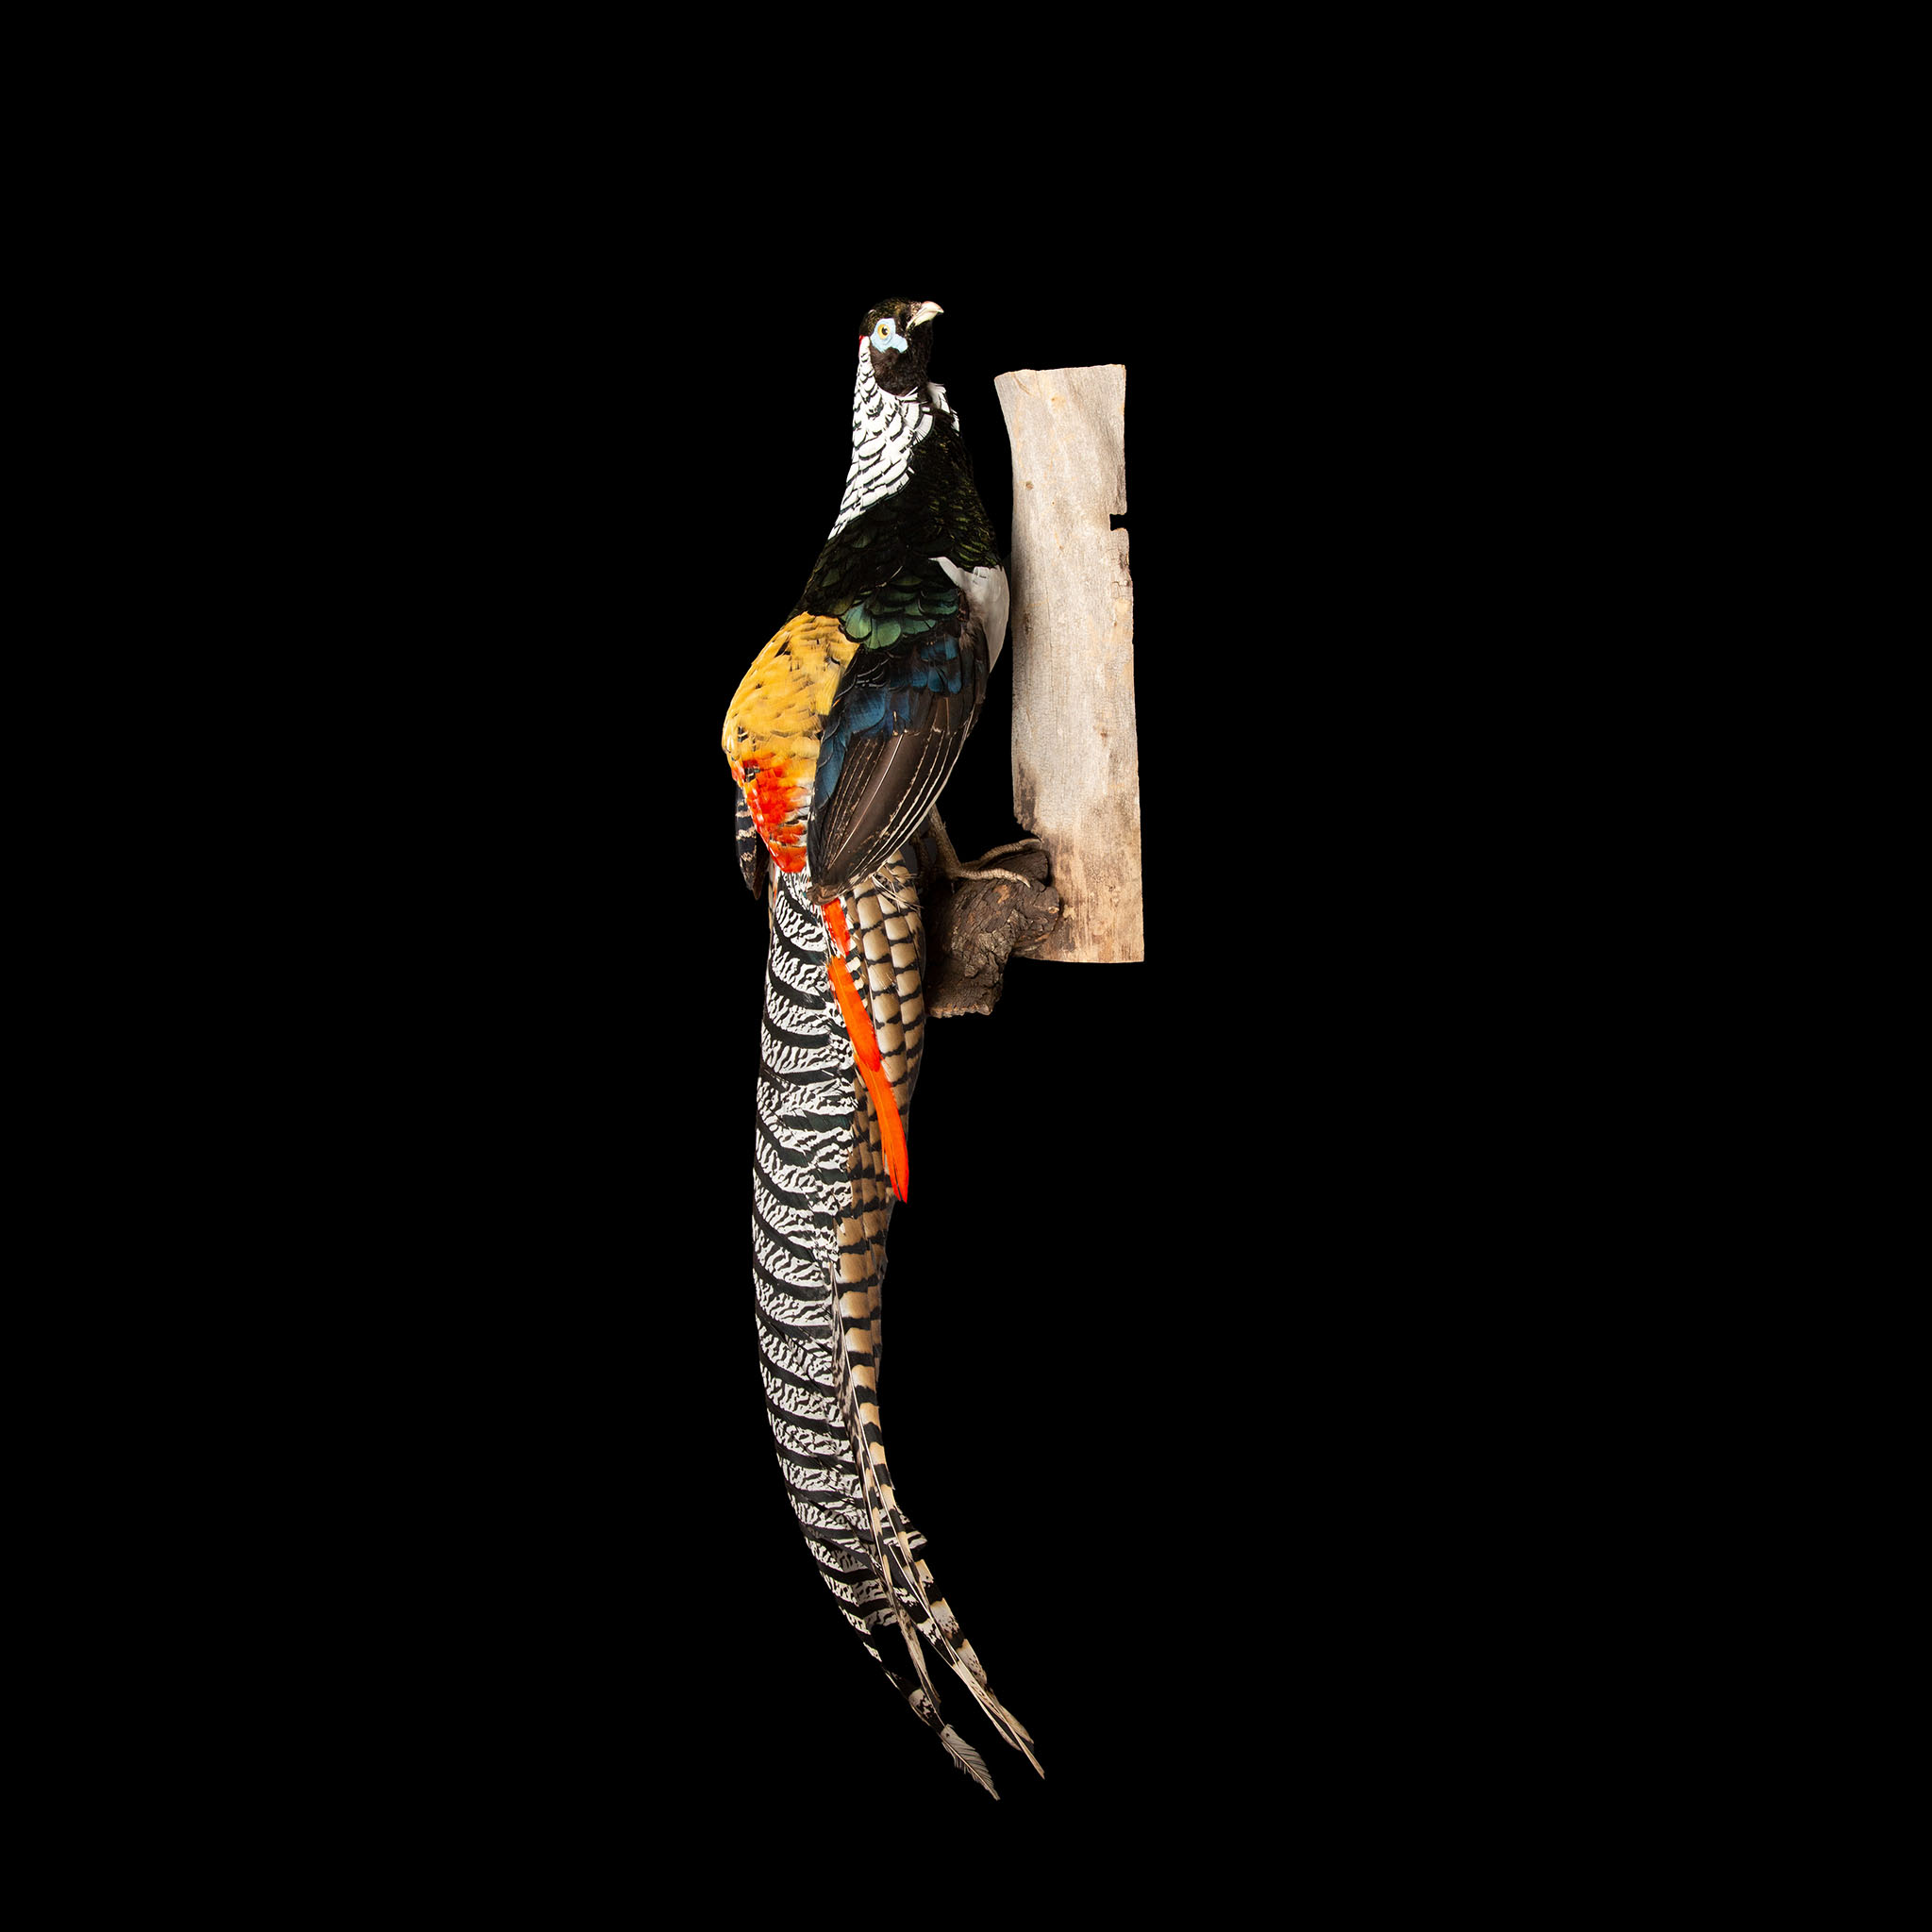 Lady Amherst Pheasant, Perched Posed